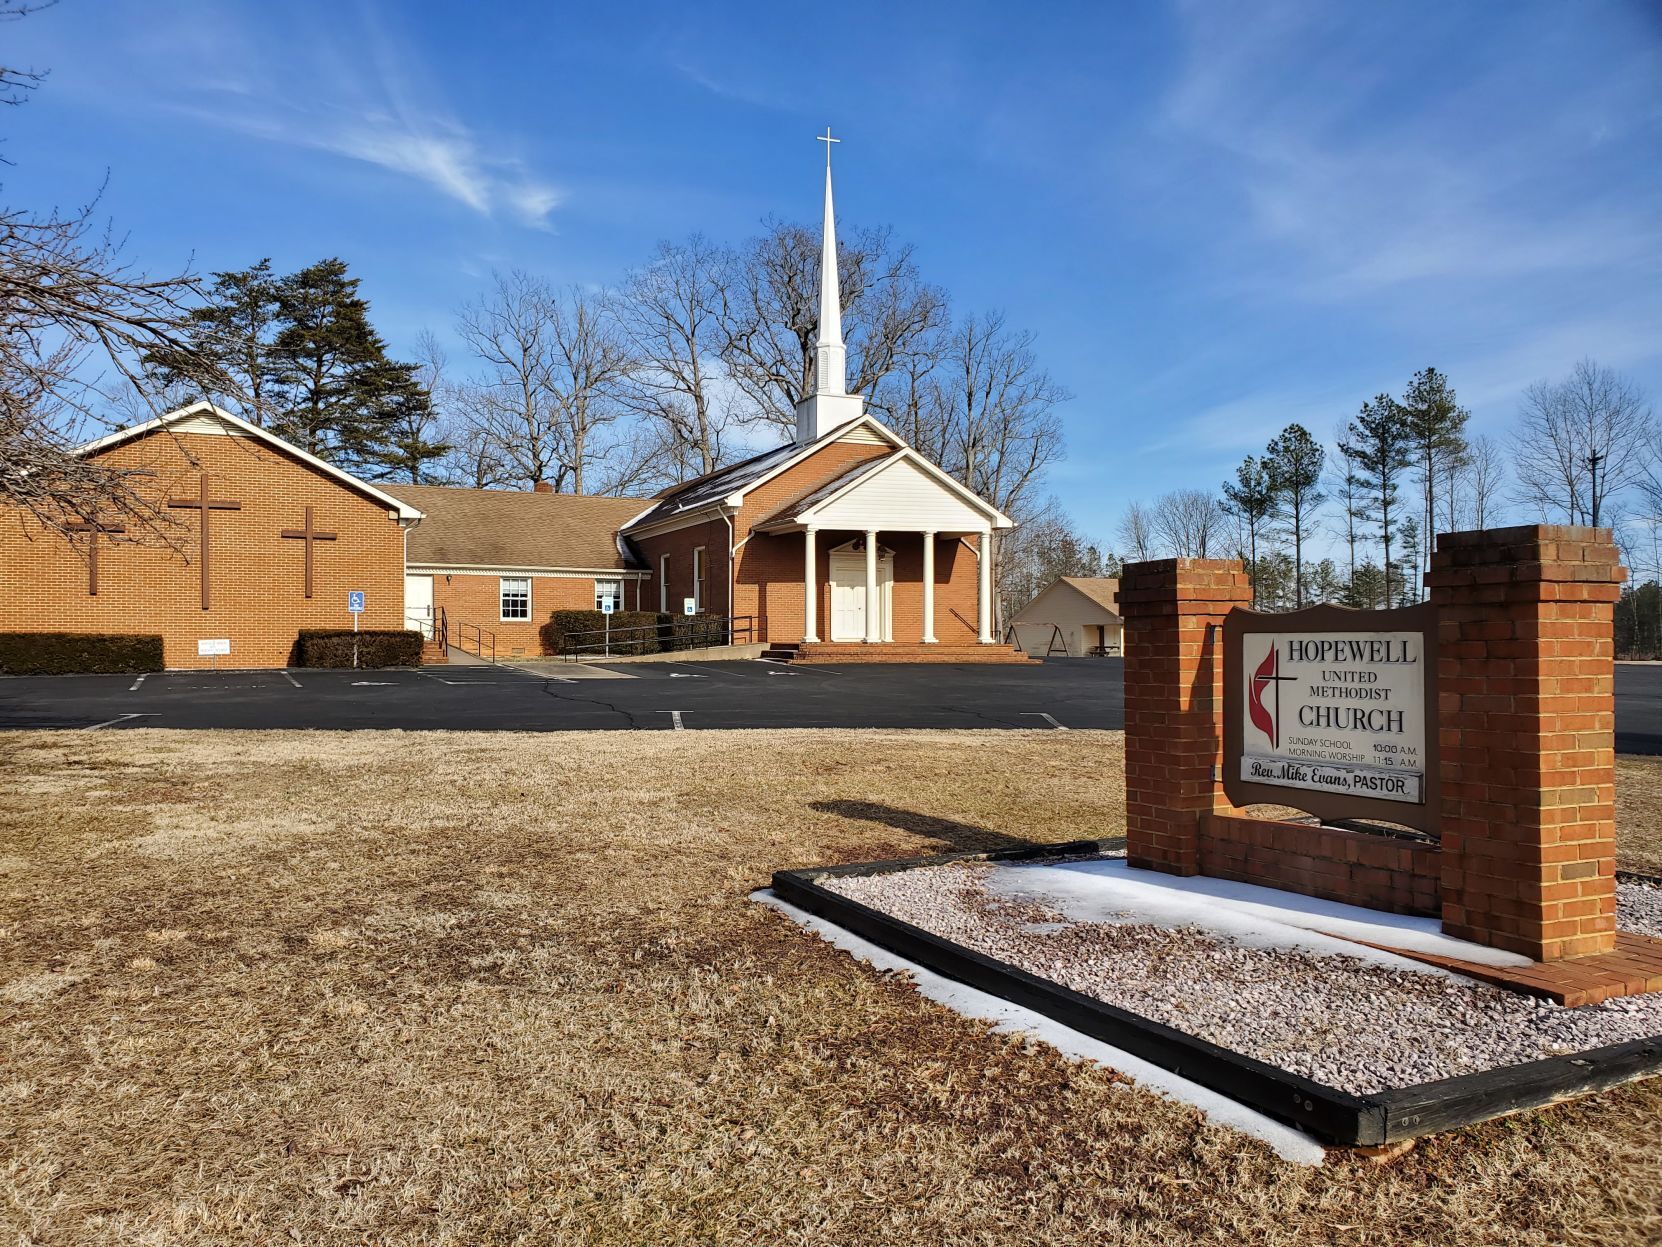 Church news for March 5, 2021